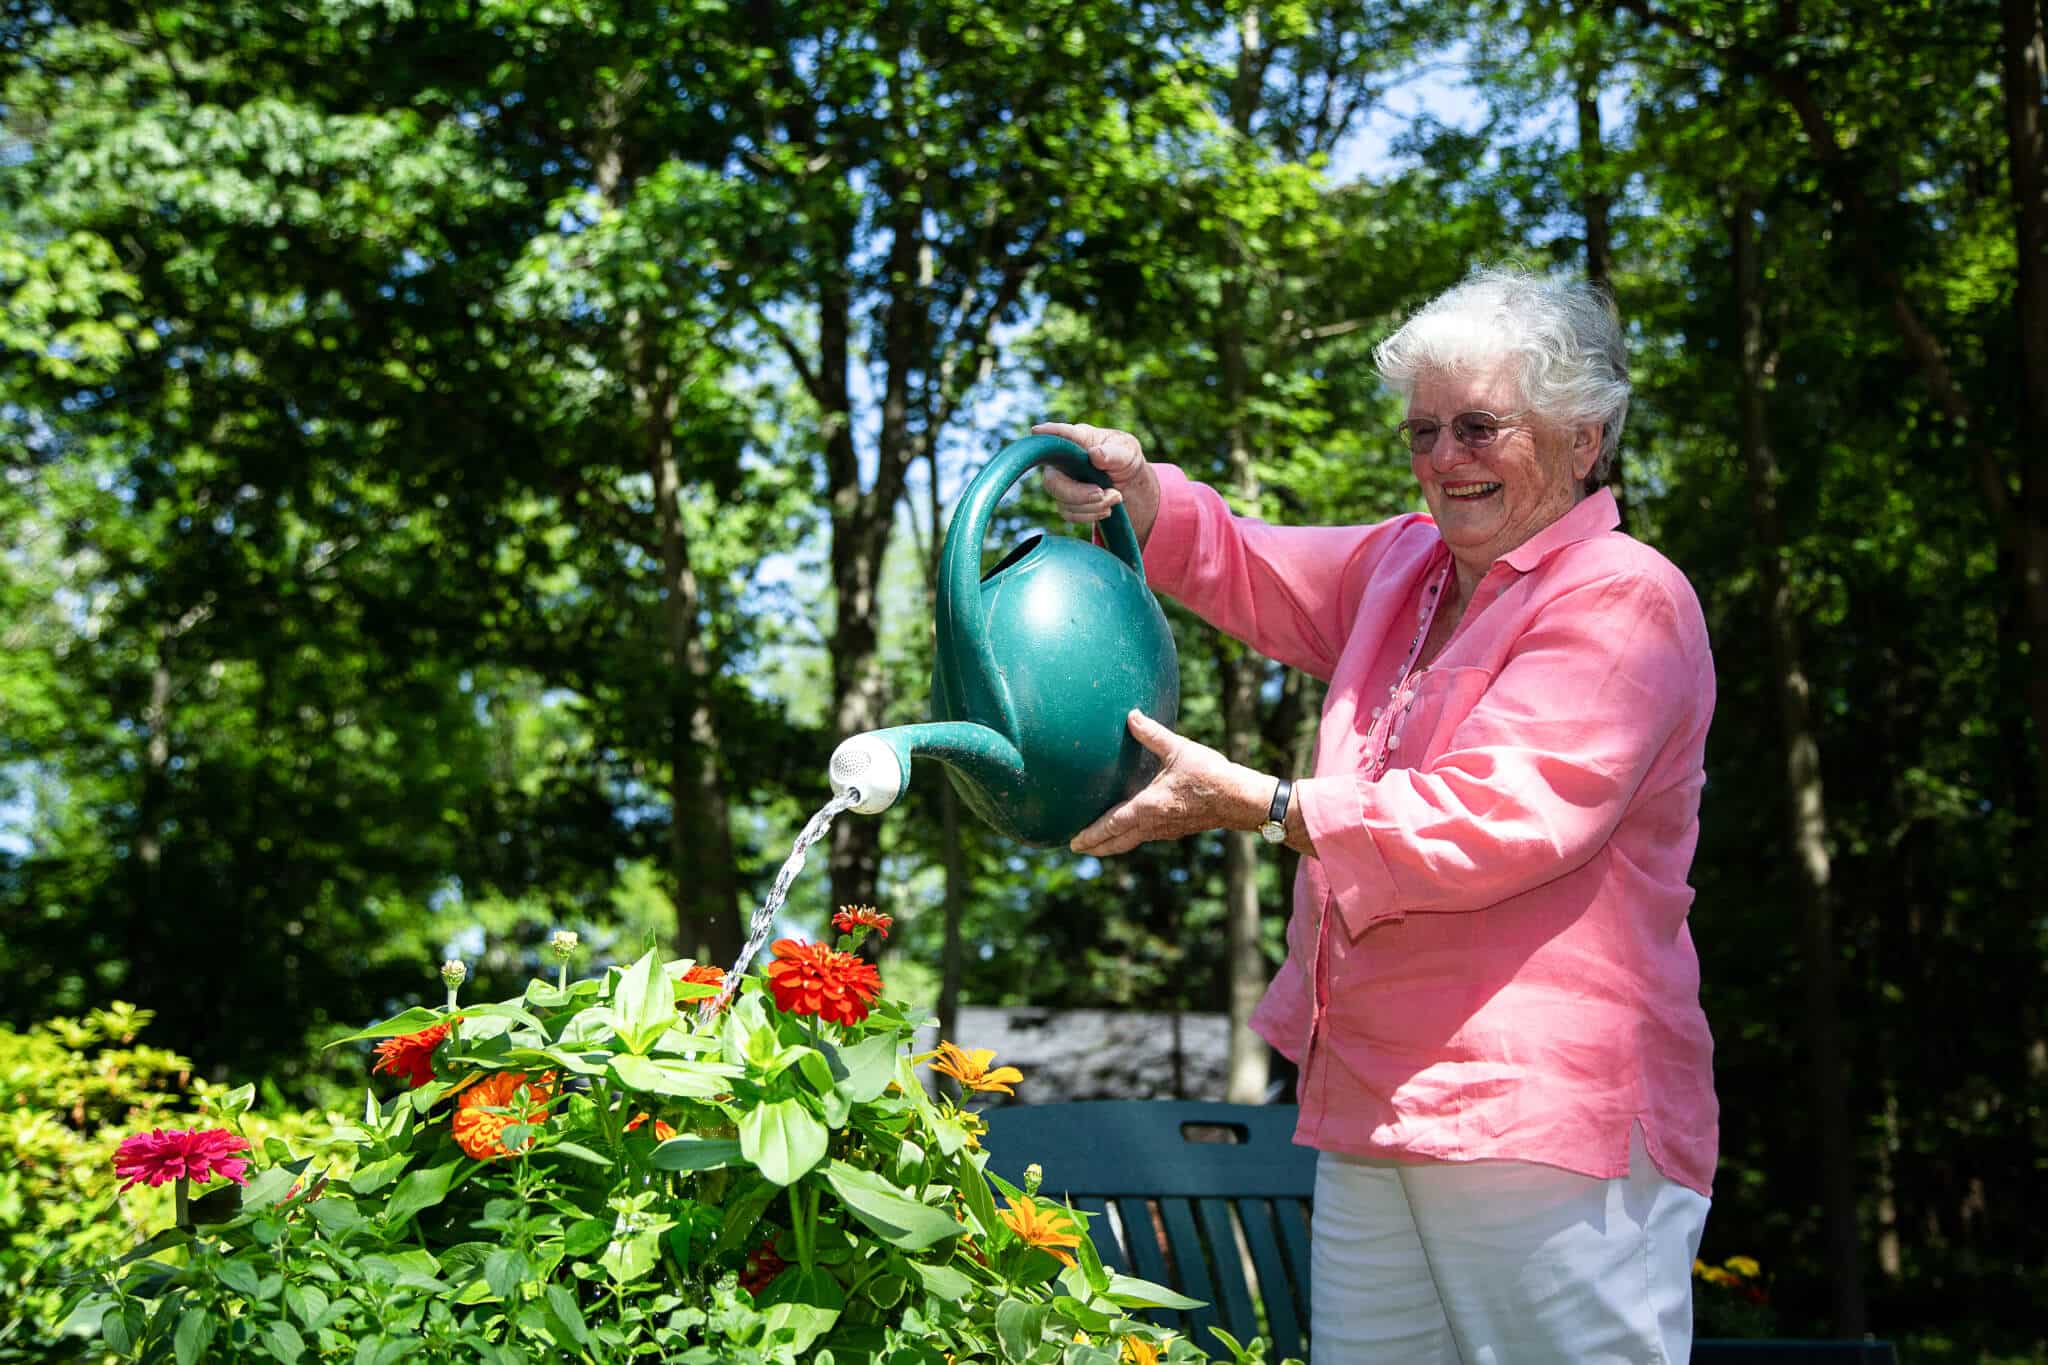 Senior woman waters flowers with a watering can in a shaded garden